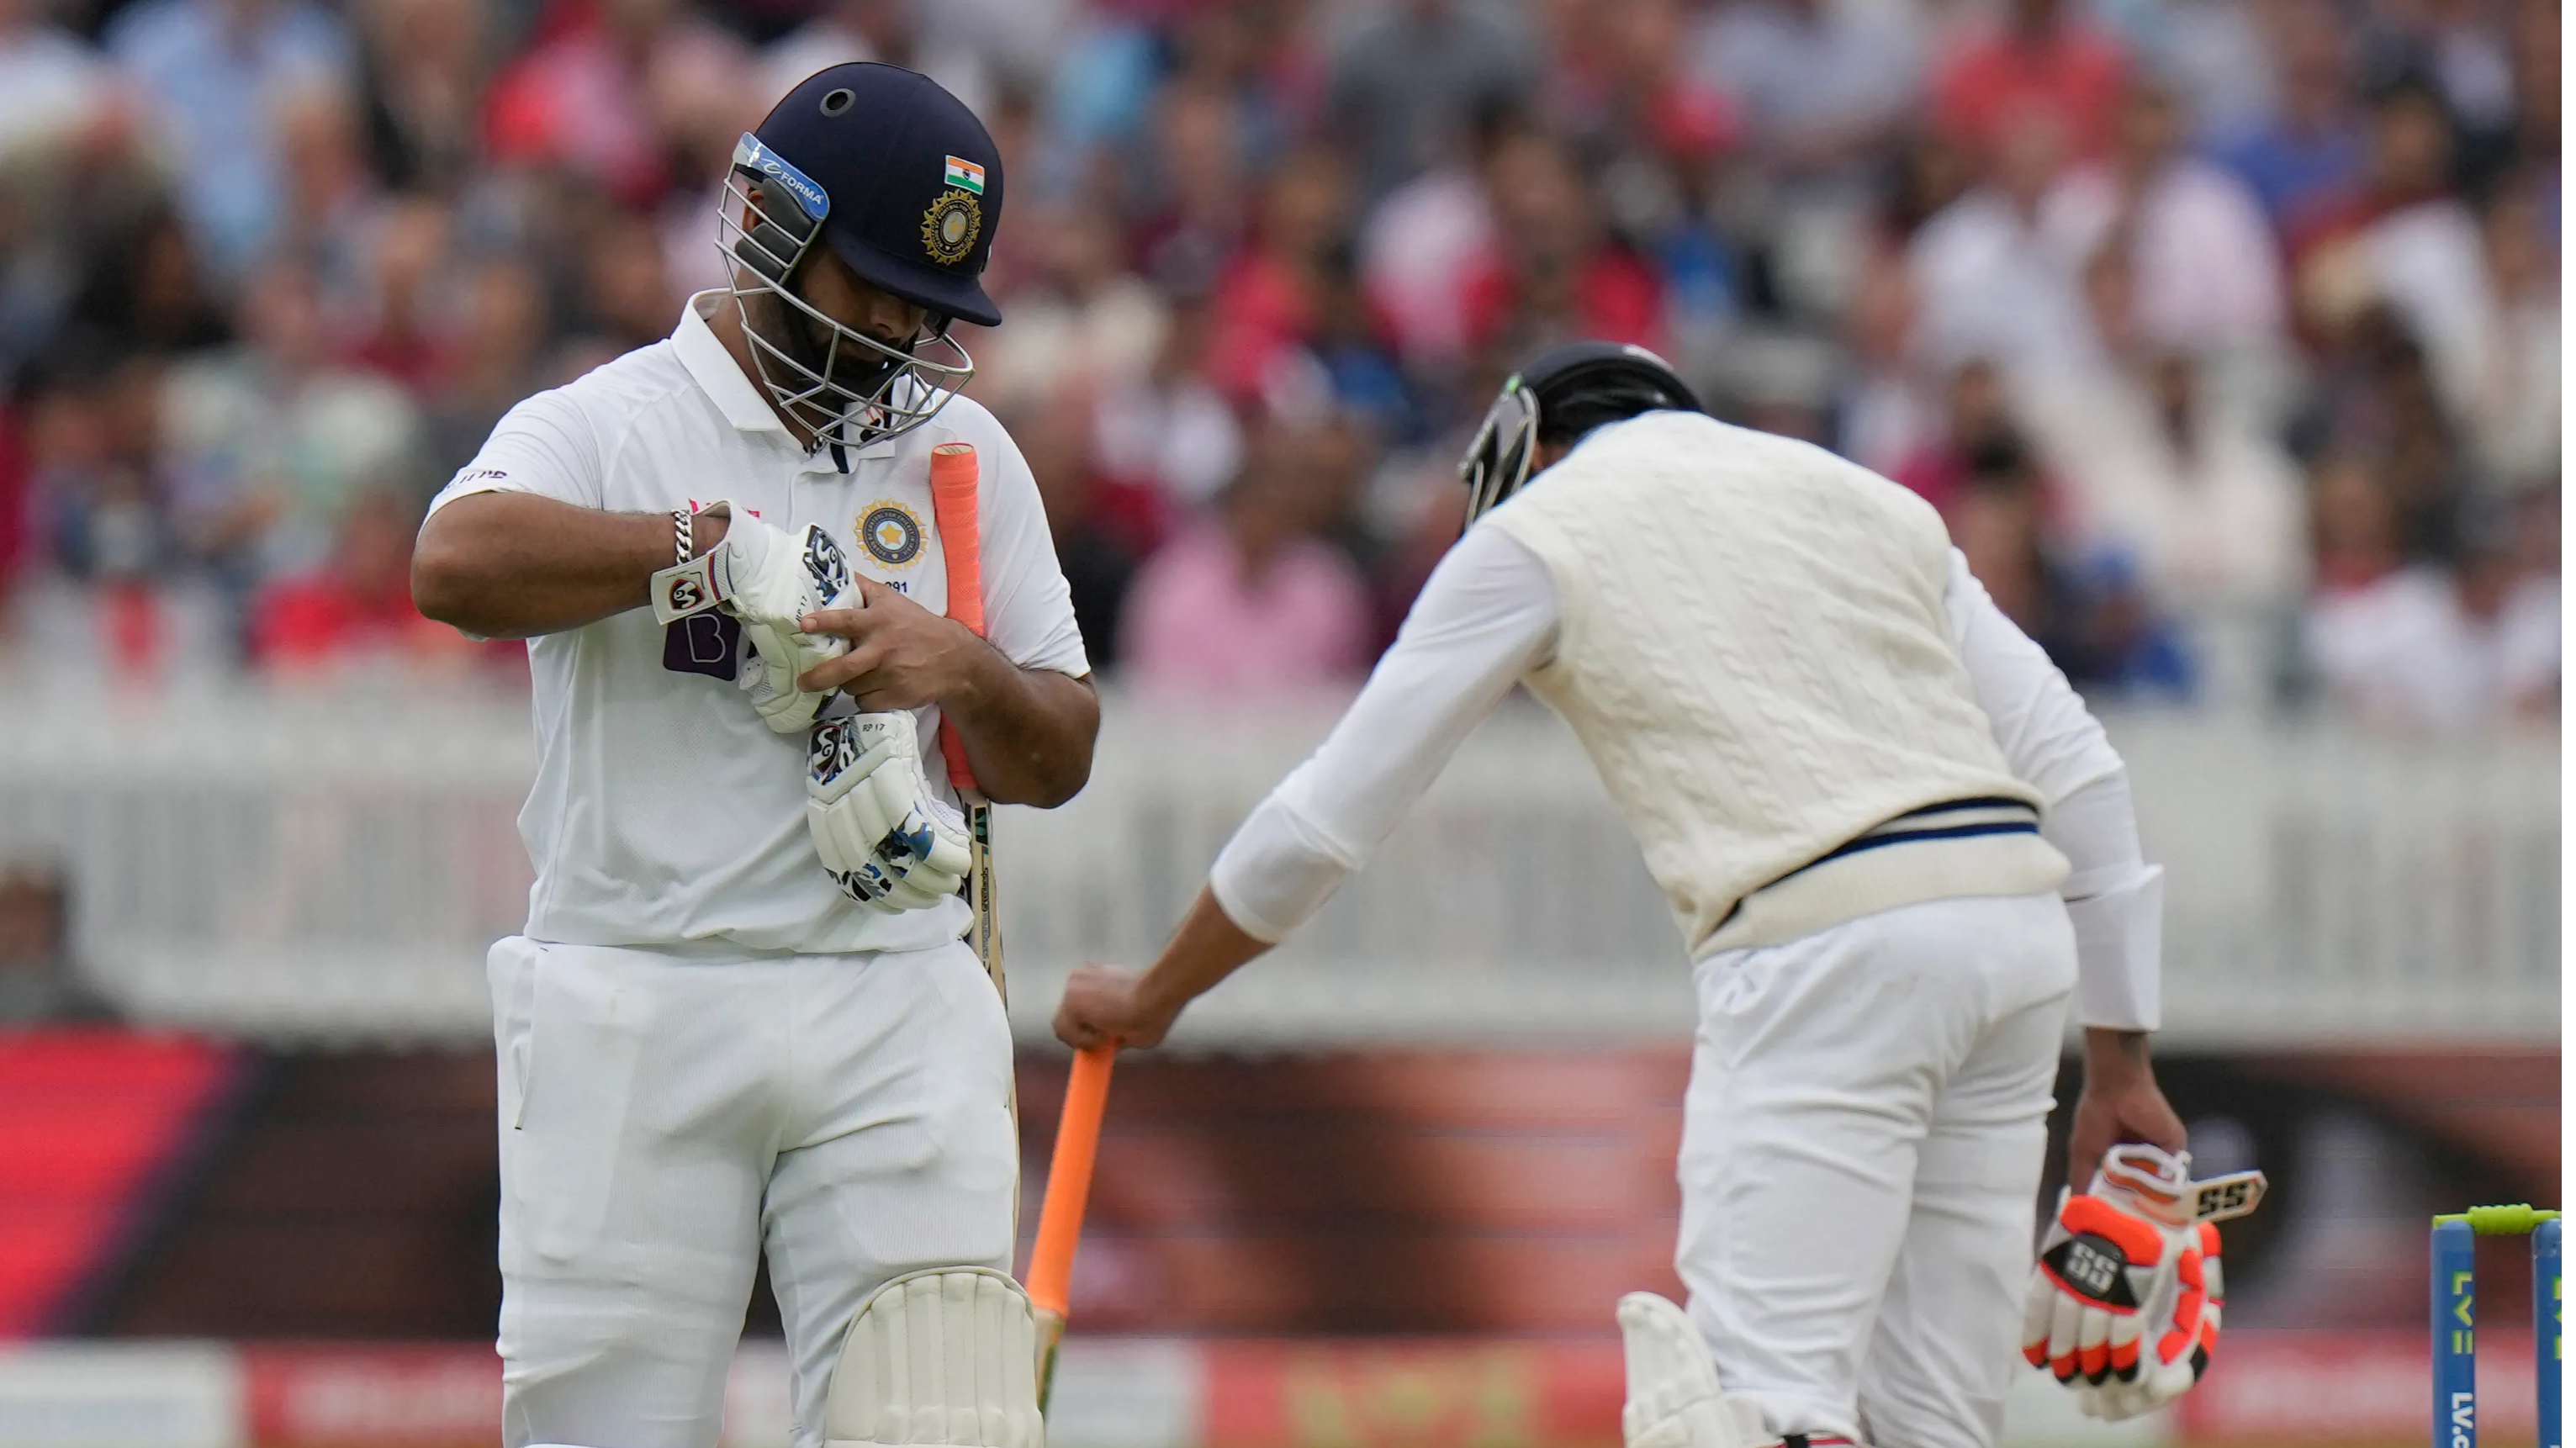 ‘Need to learn from mistakes’: Team India after disastrous day 1 in 3rd Test